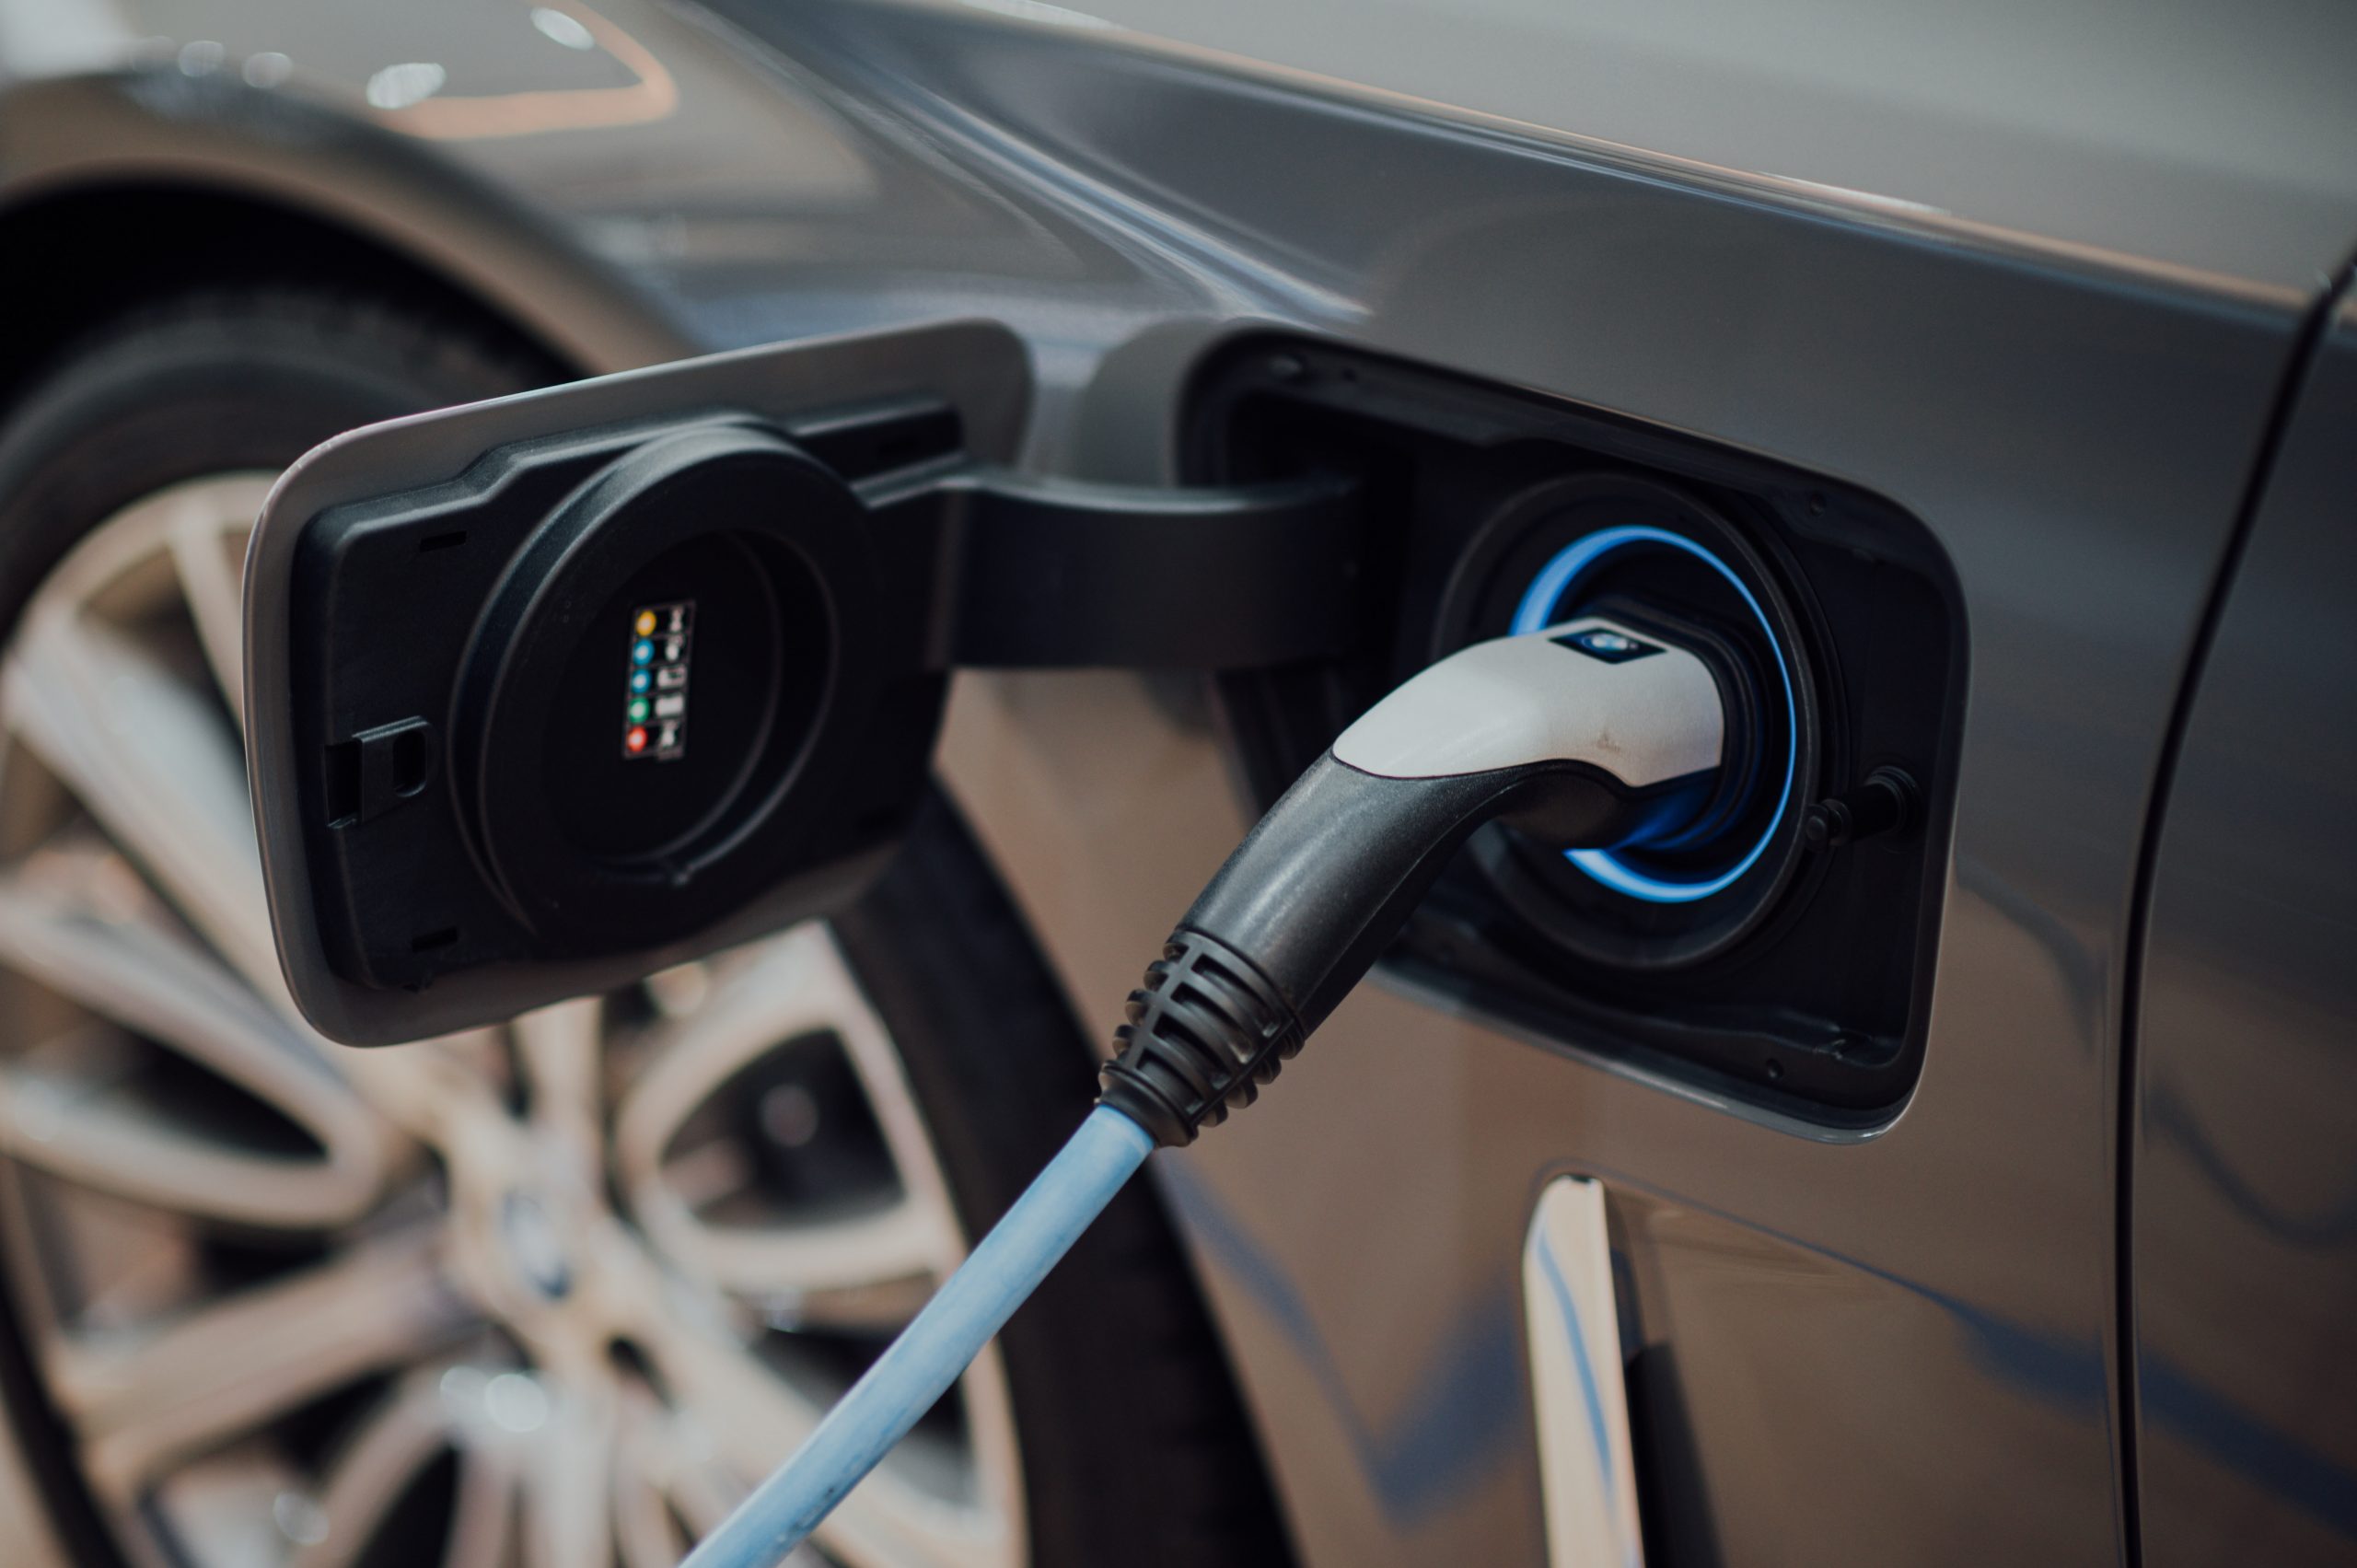 Sales of electric and hybrid cars in the EU almost tripled in 2020